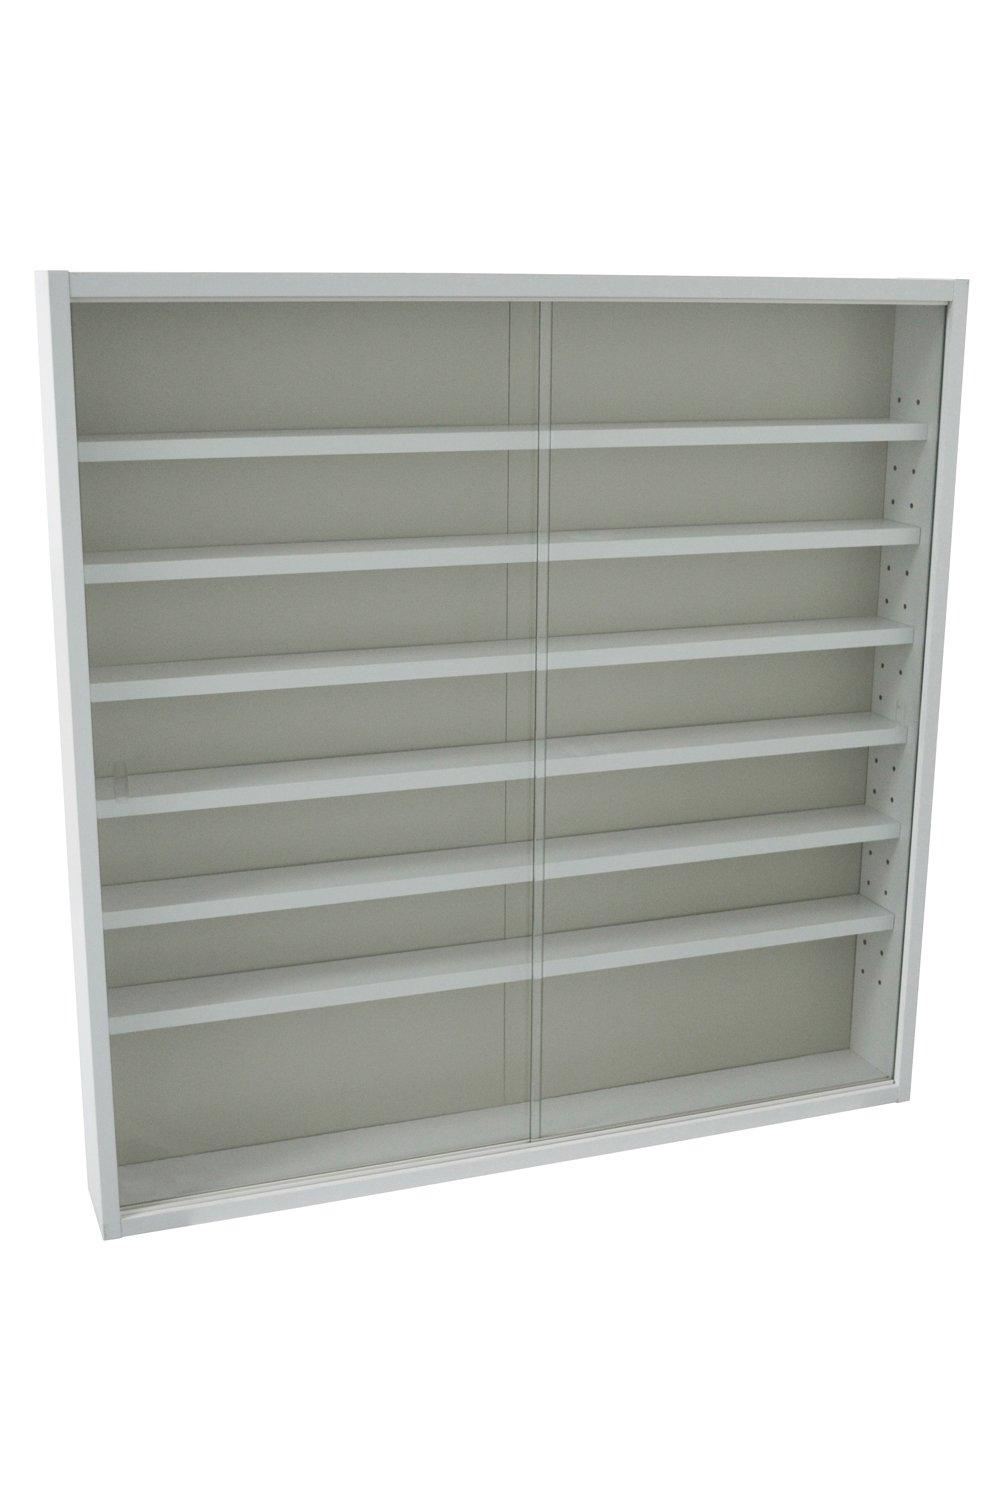 'Reveal'  6 Shelf Glass Wall Collectors Display Cabinet  White